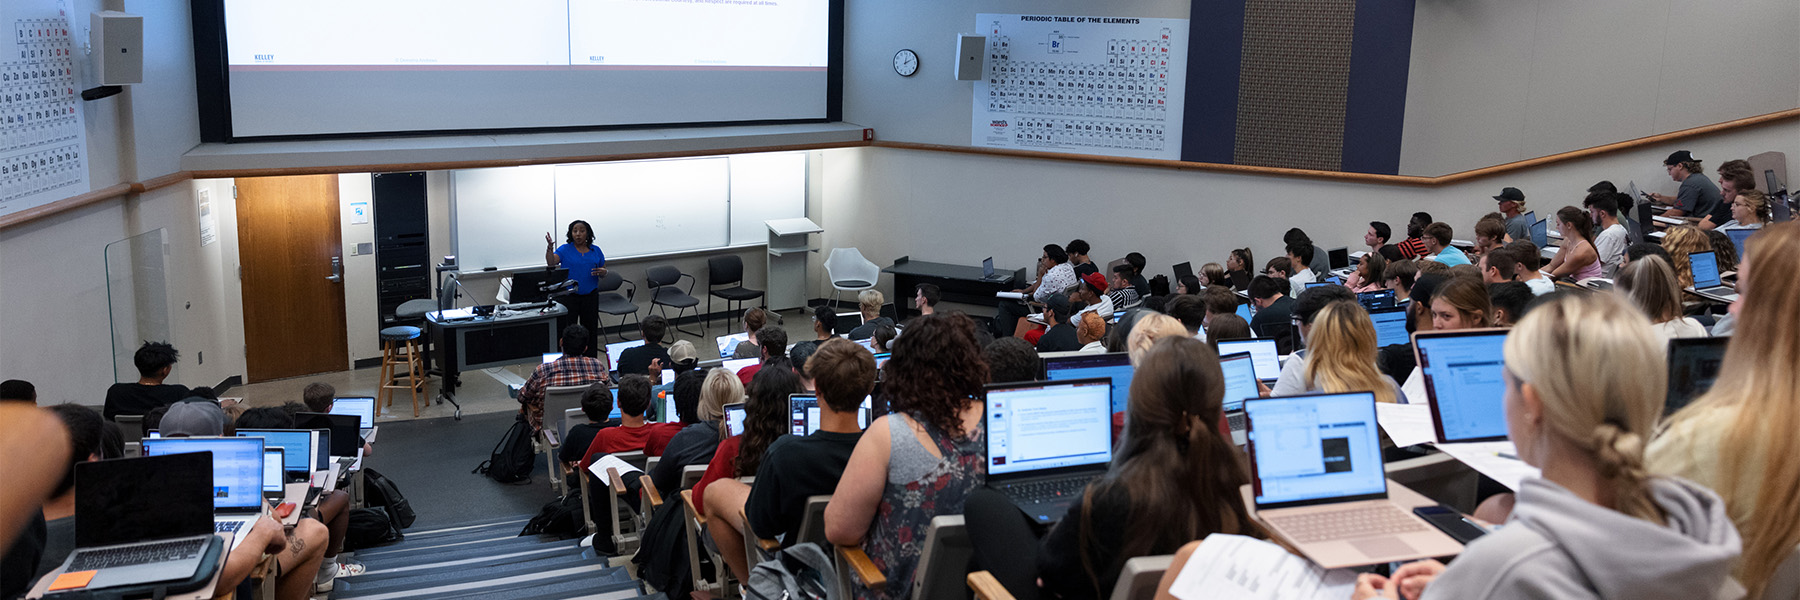 In the lecture hall, students are attentively taking notes on their laptops as the professor teaches the course.